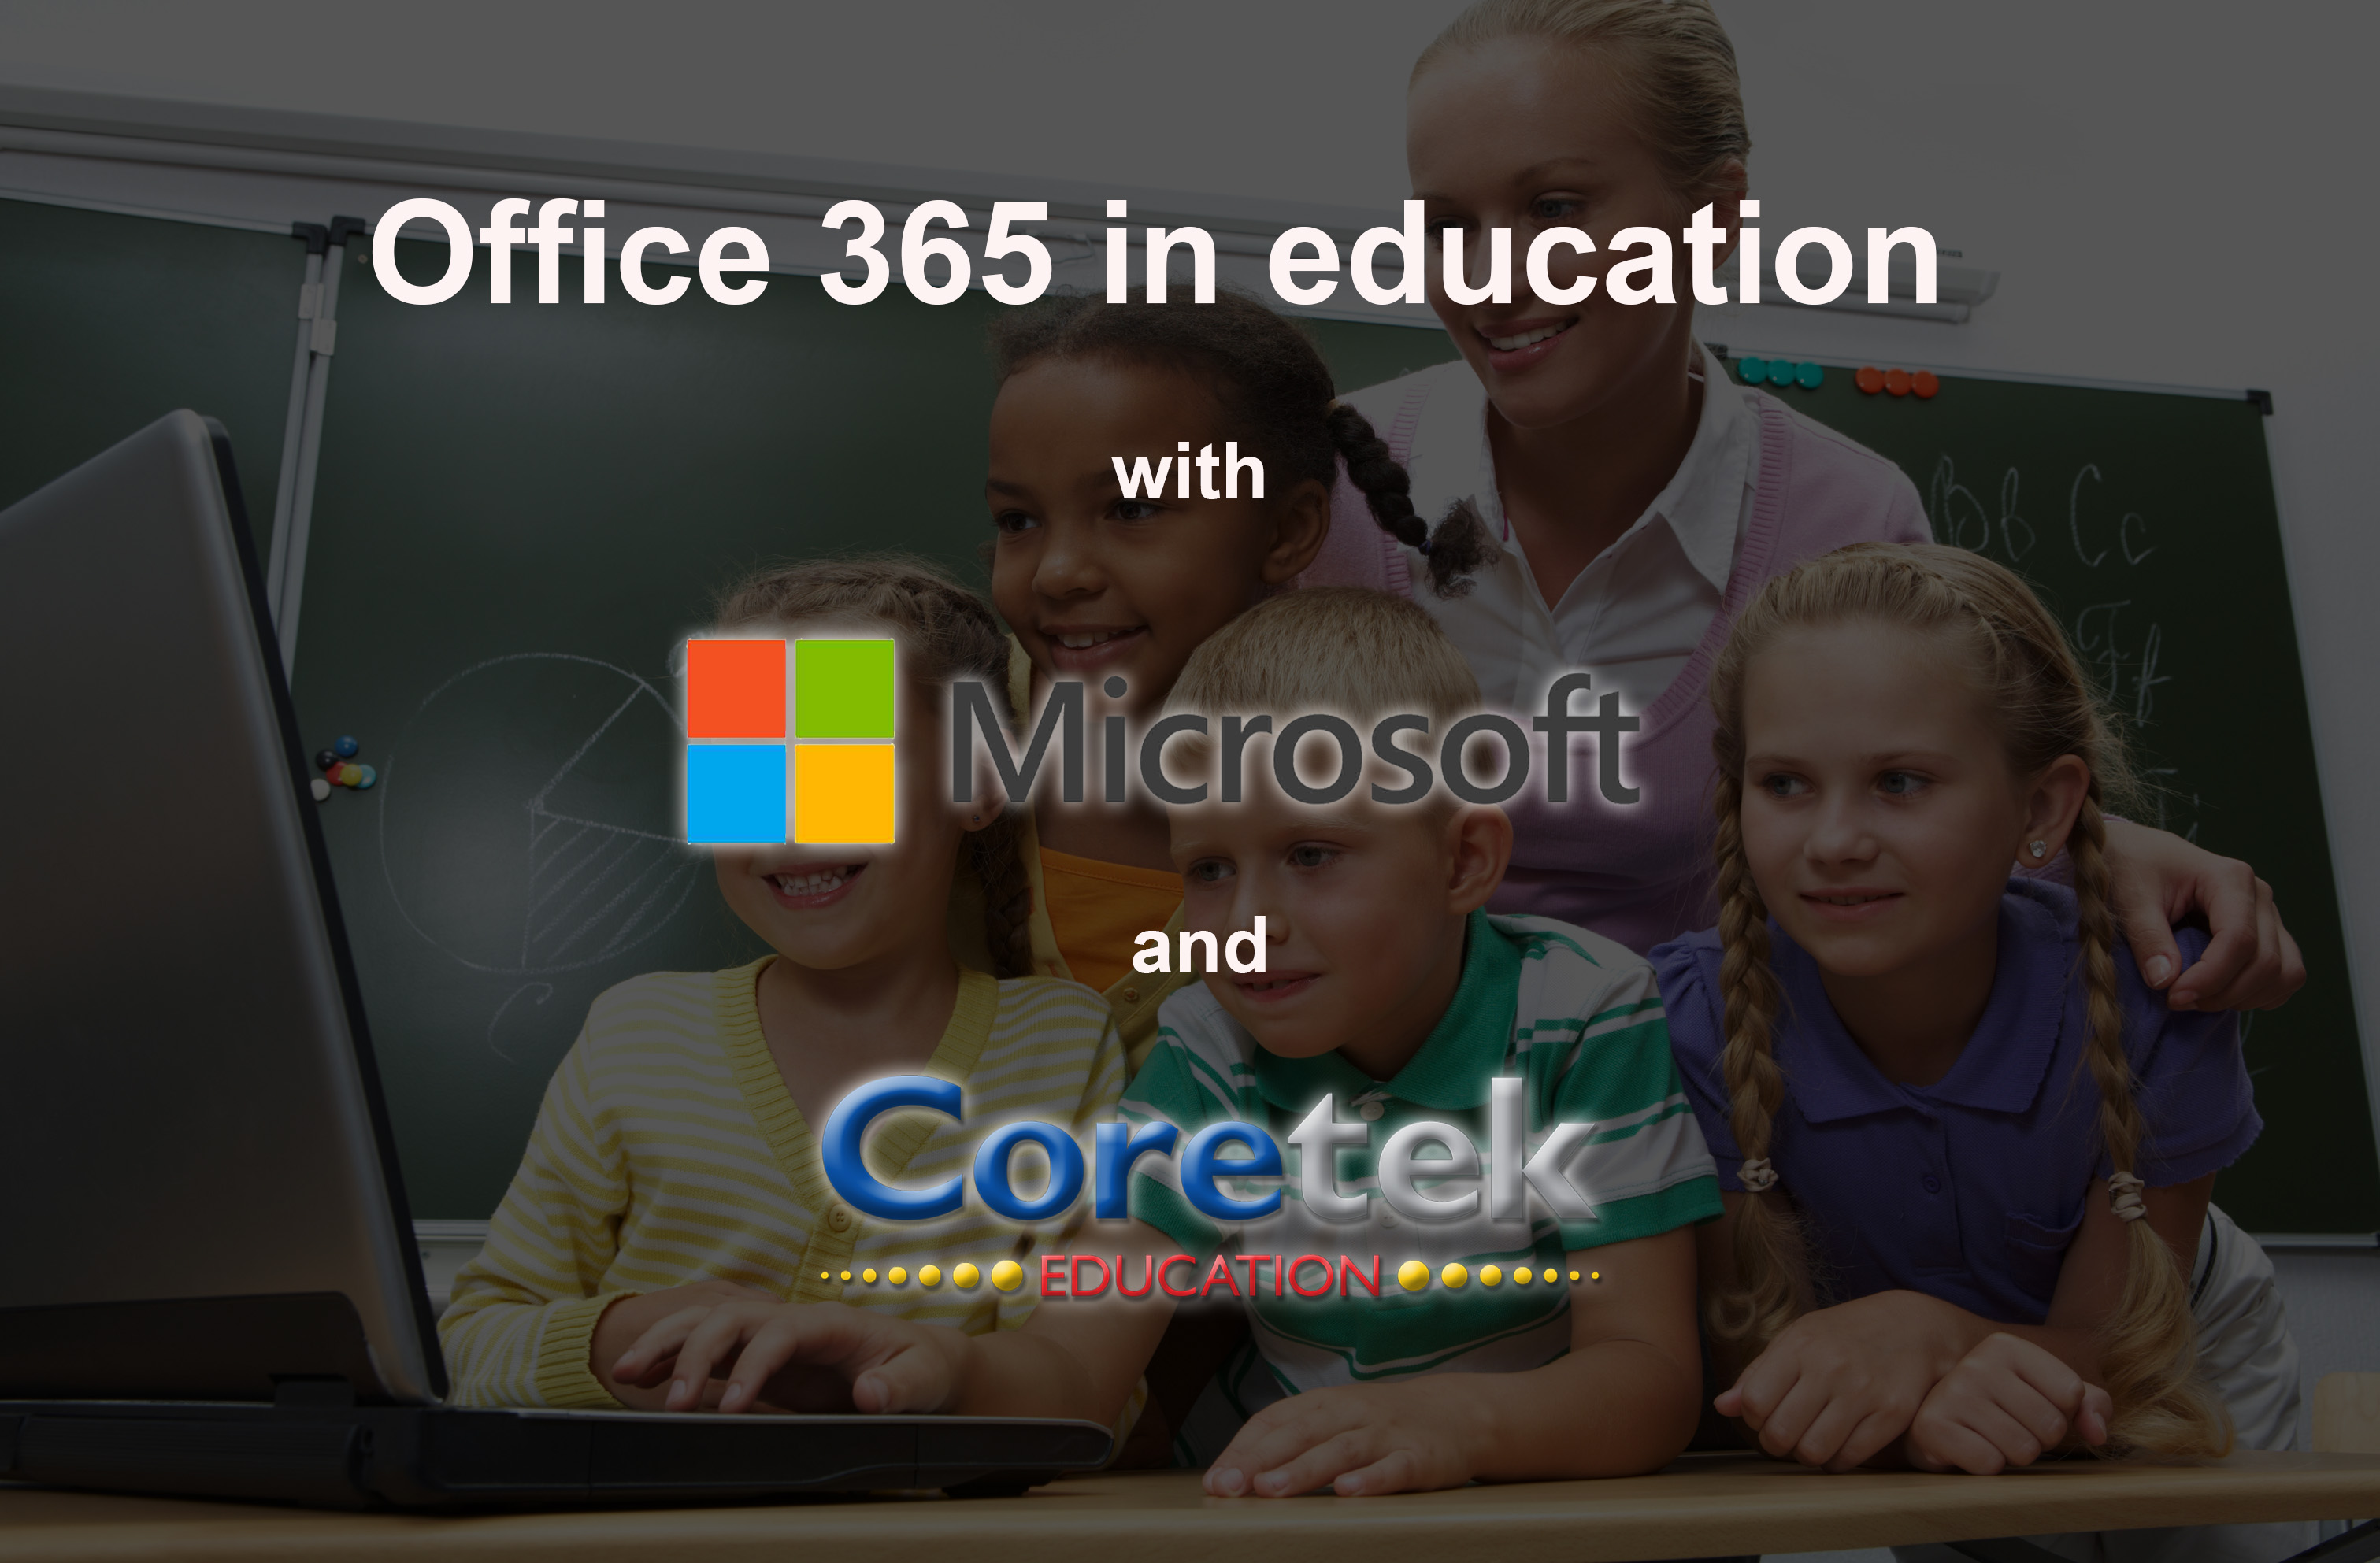 Learn about Office 365 at the Microsoft and Coretek Educational Event!